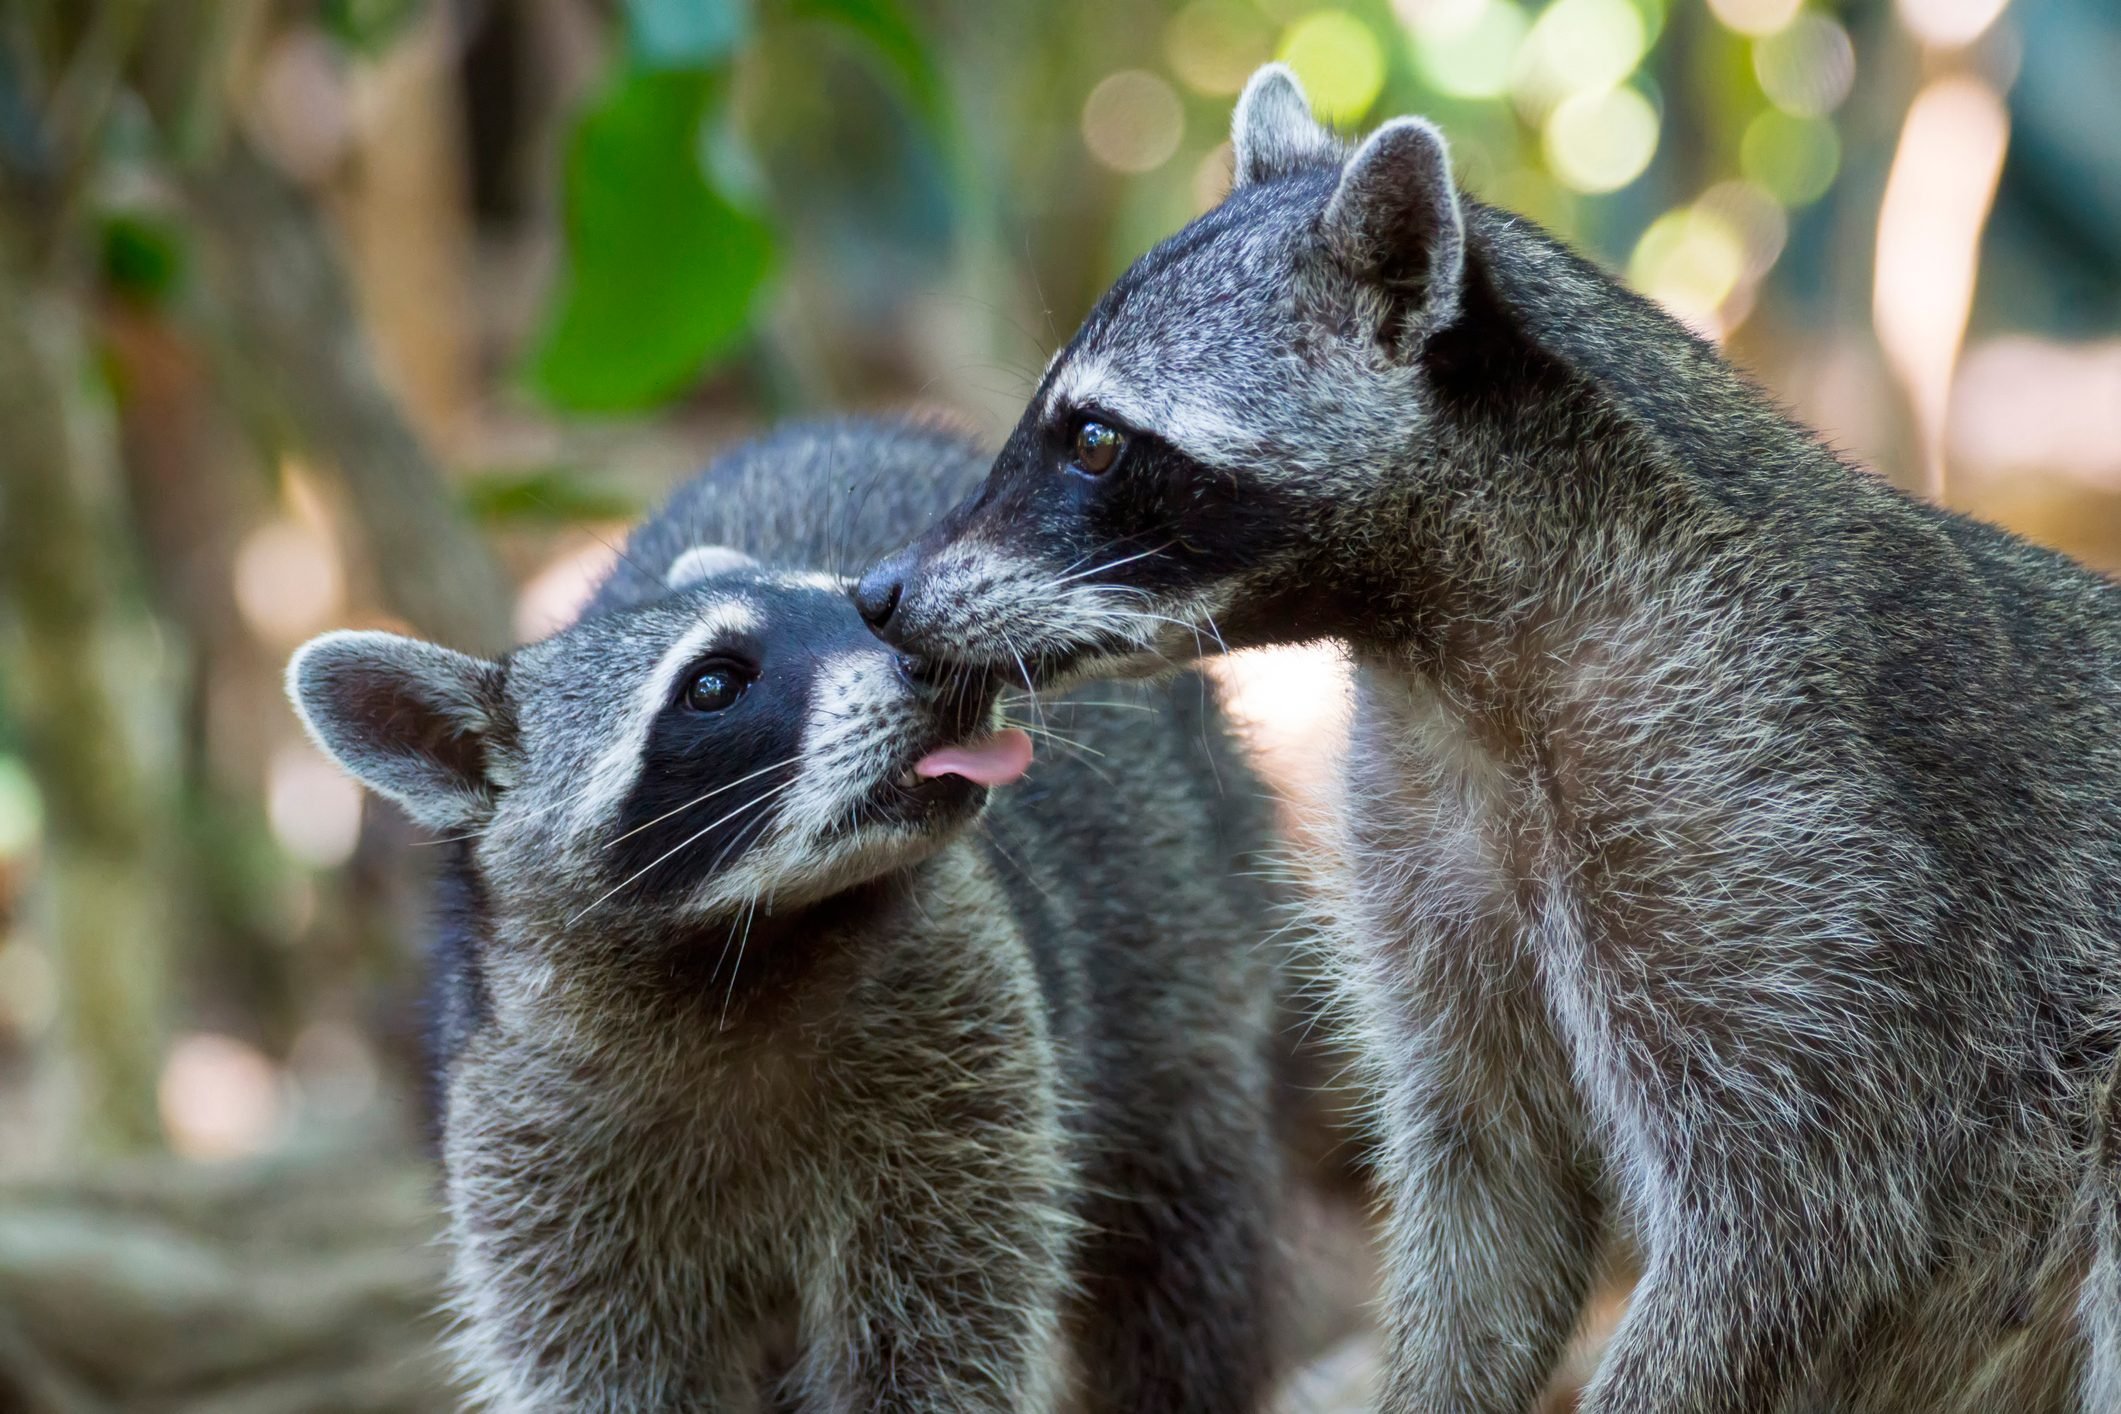 Two kissing racoons (Procyon lotor)